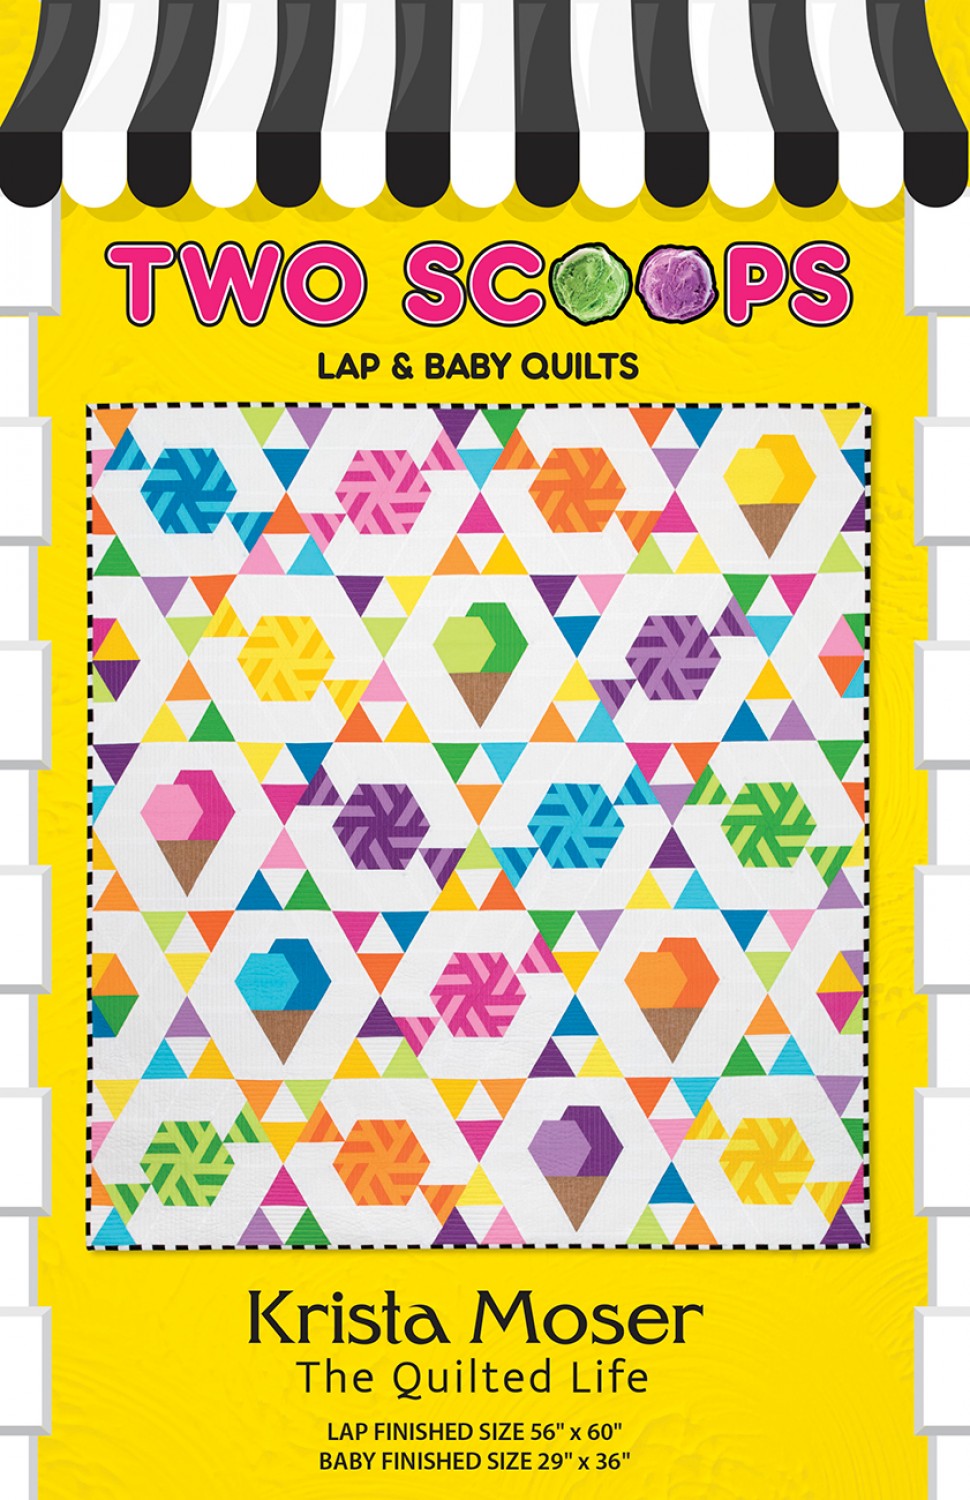 Two Scoops, Lap & Baby Quilts